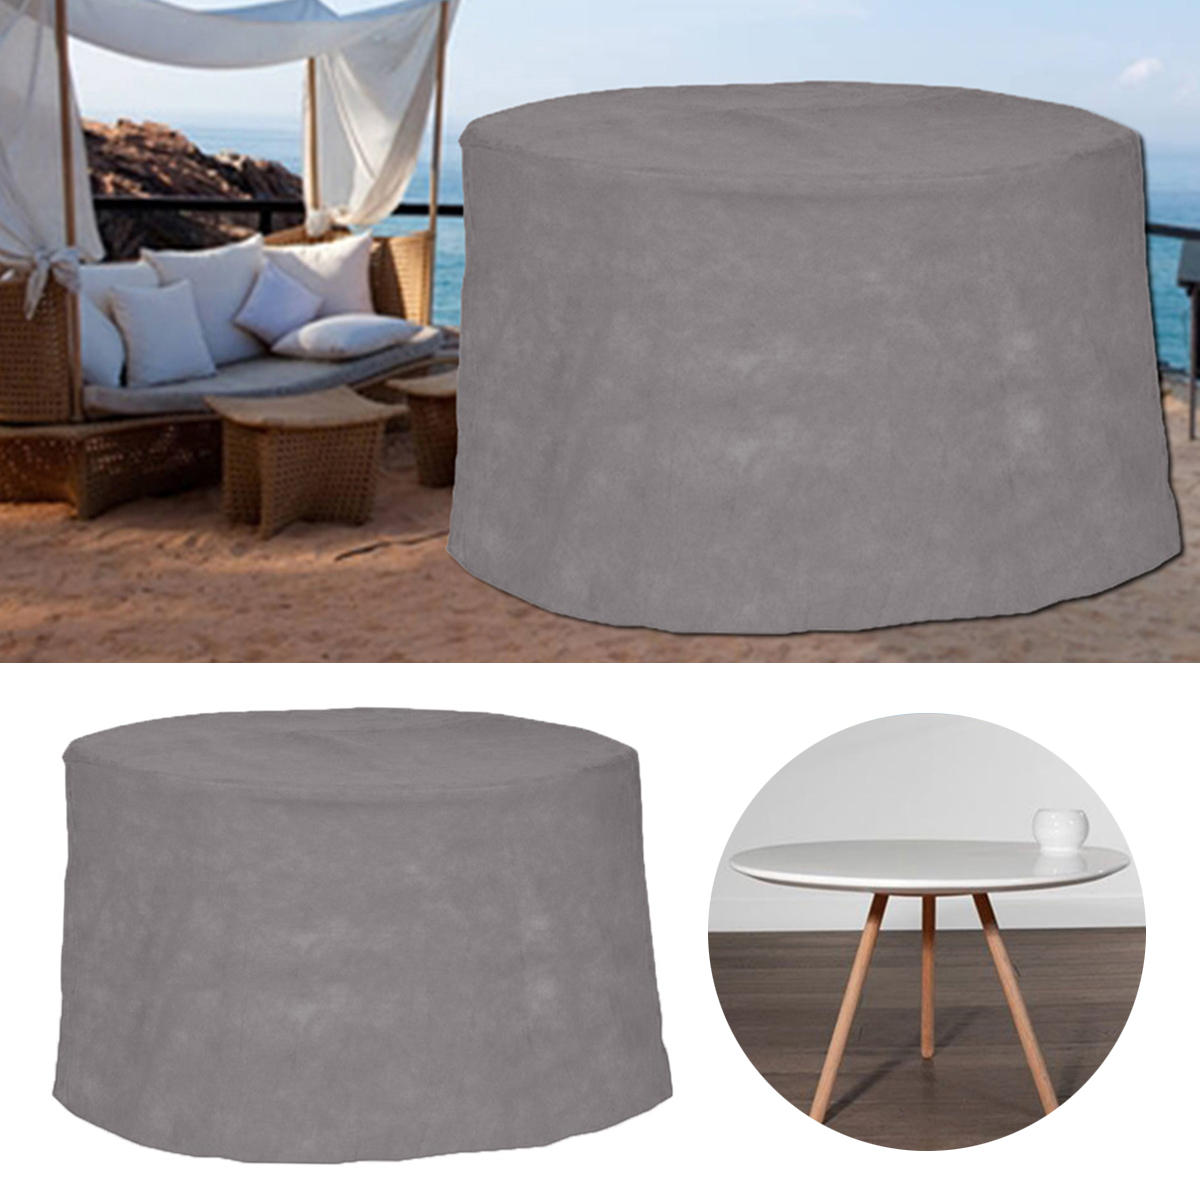 200x94CM Garden Patio Table Furniture Waterproof Cover Outdoor Dust Shelter Protection